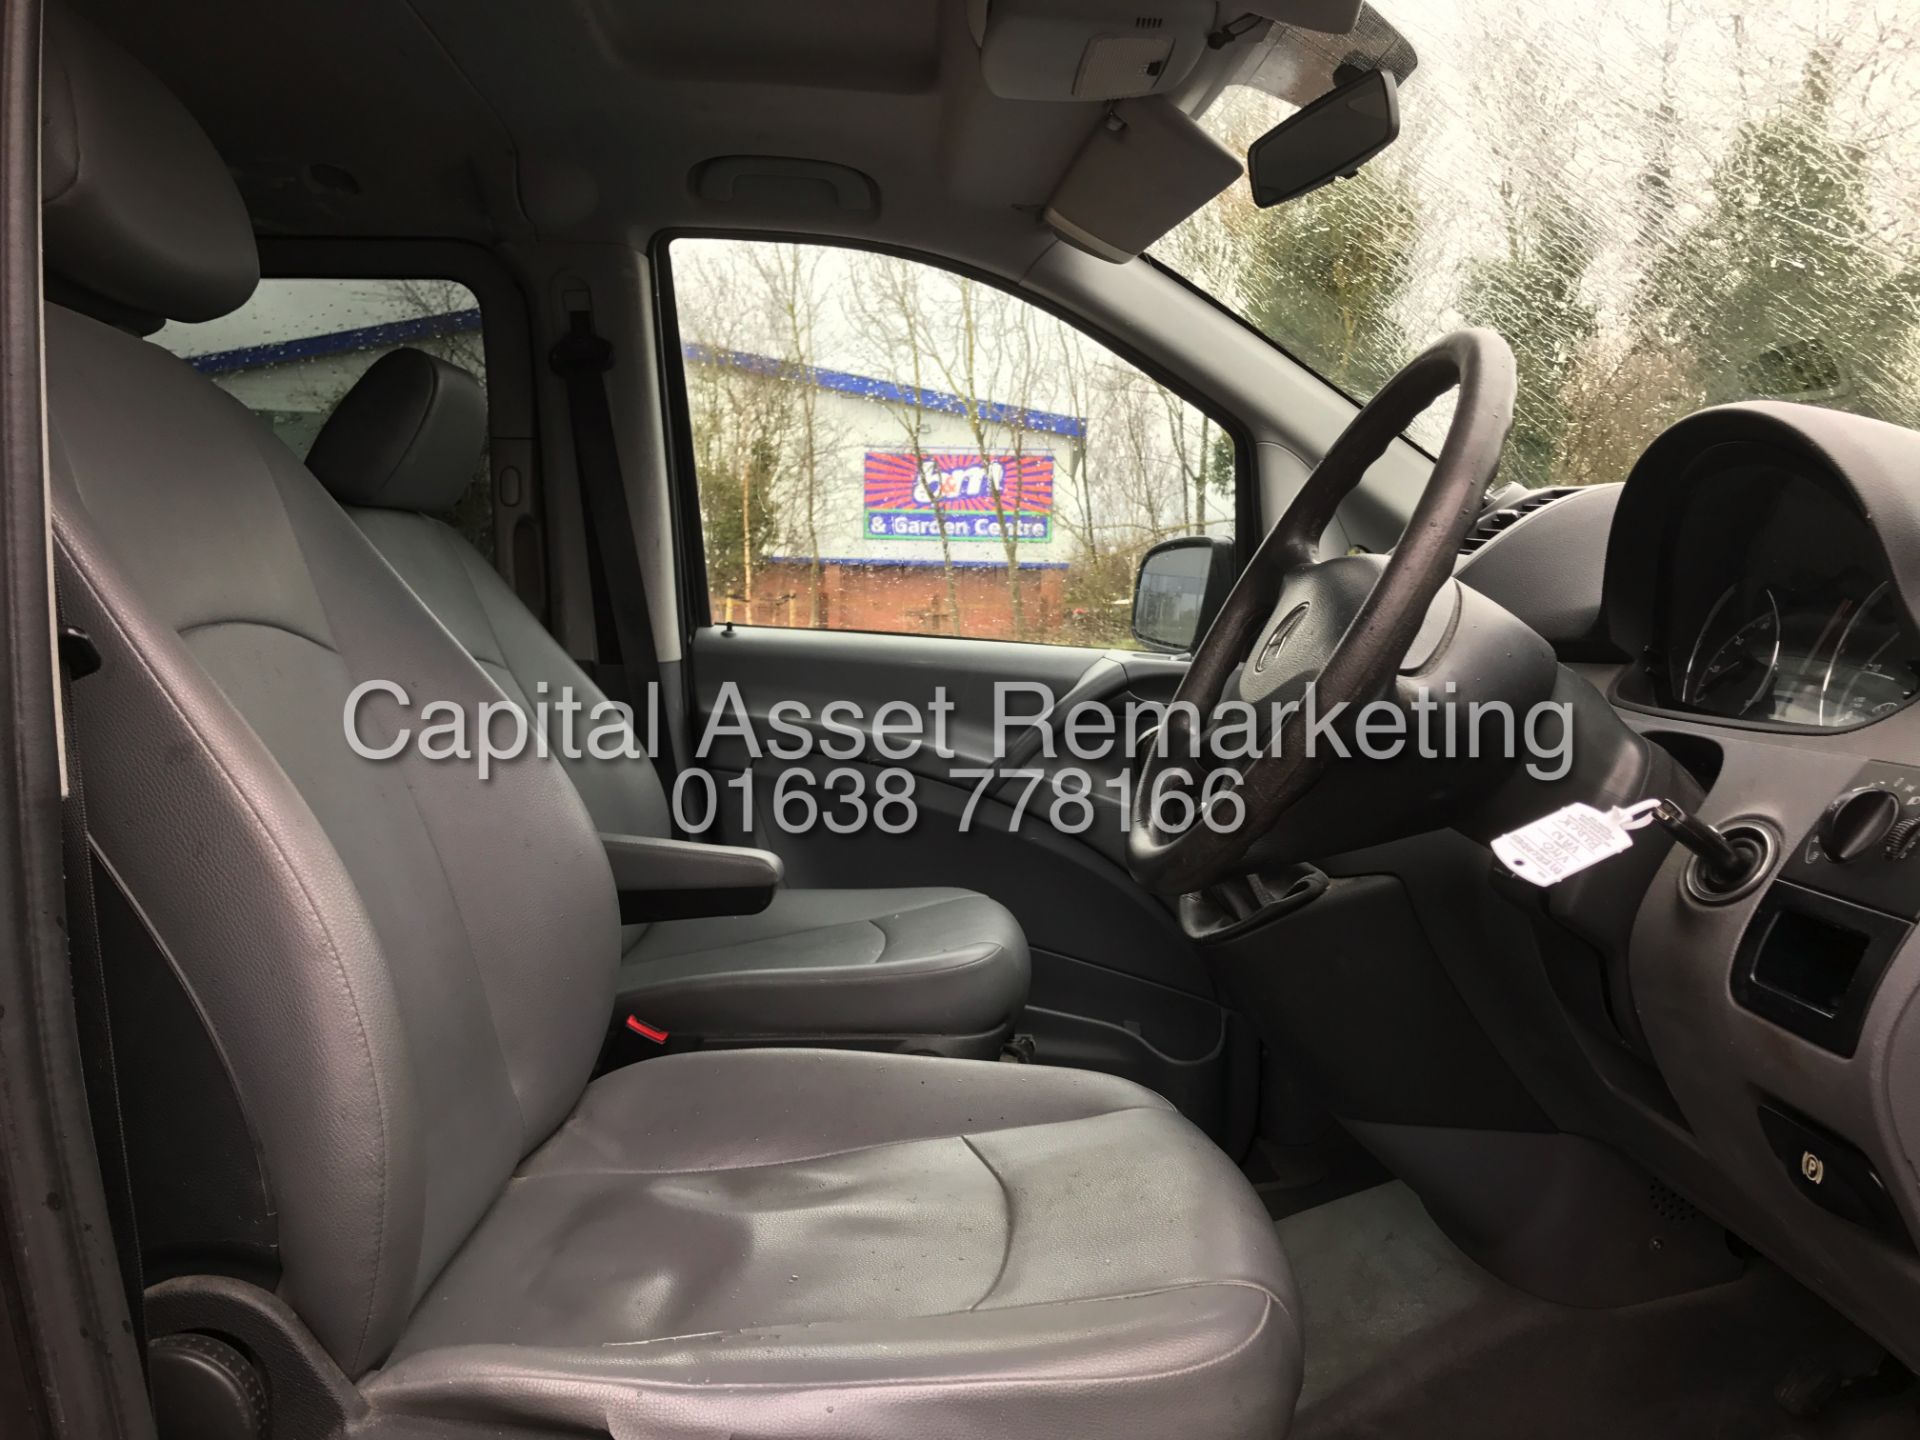 (ON SALE) MERCEDES VITO "SPORTY - 115BHP" LWB (2011 MODEL) 5 SEATER DUELINER -1 OWNER-AIR CON-ALLOYS - Bild 10 aus 18